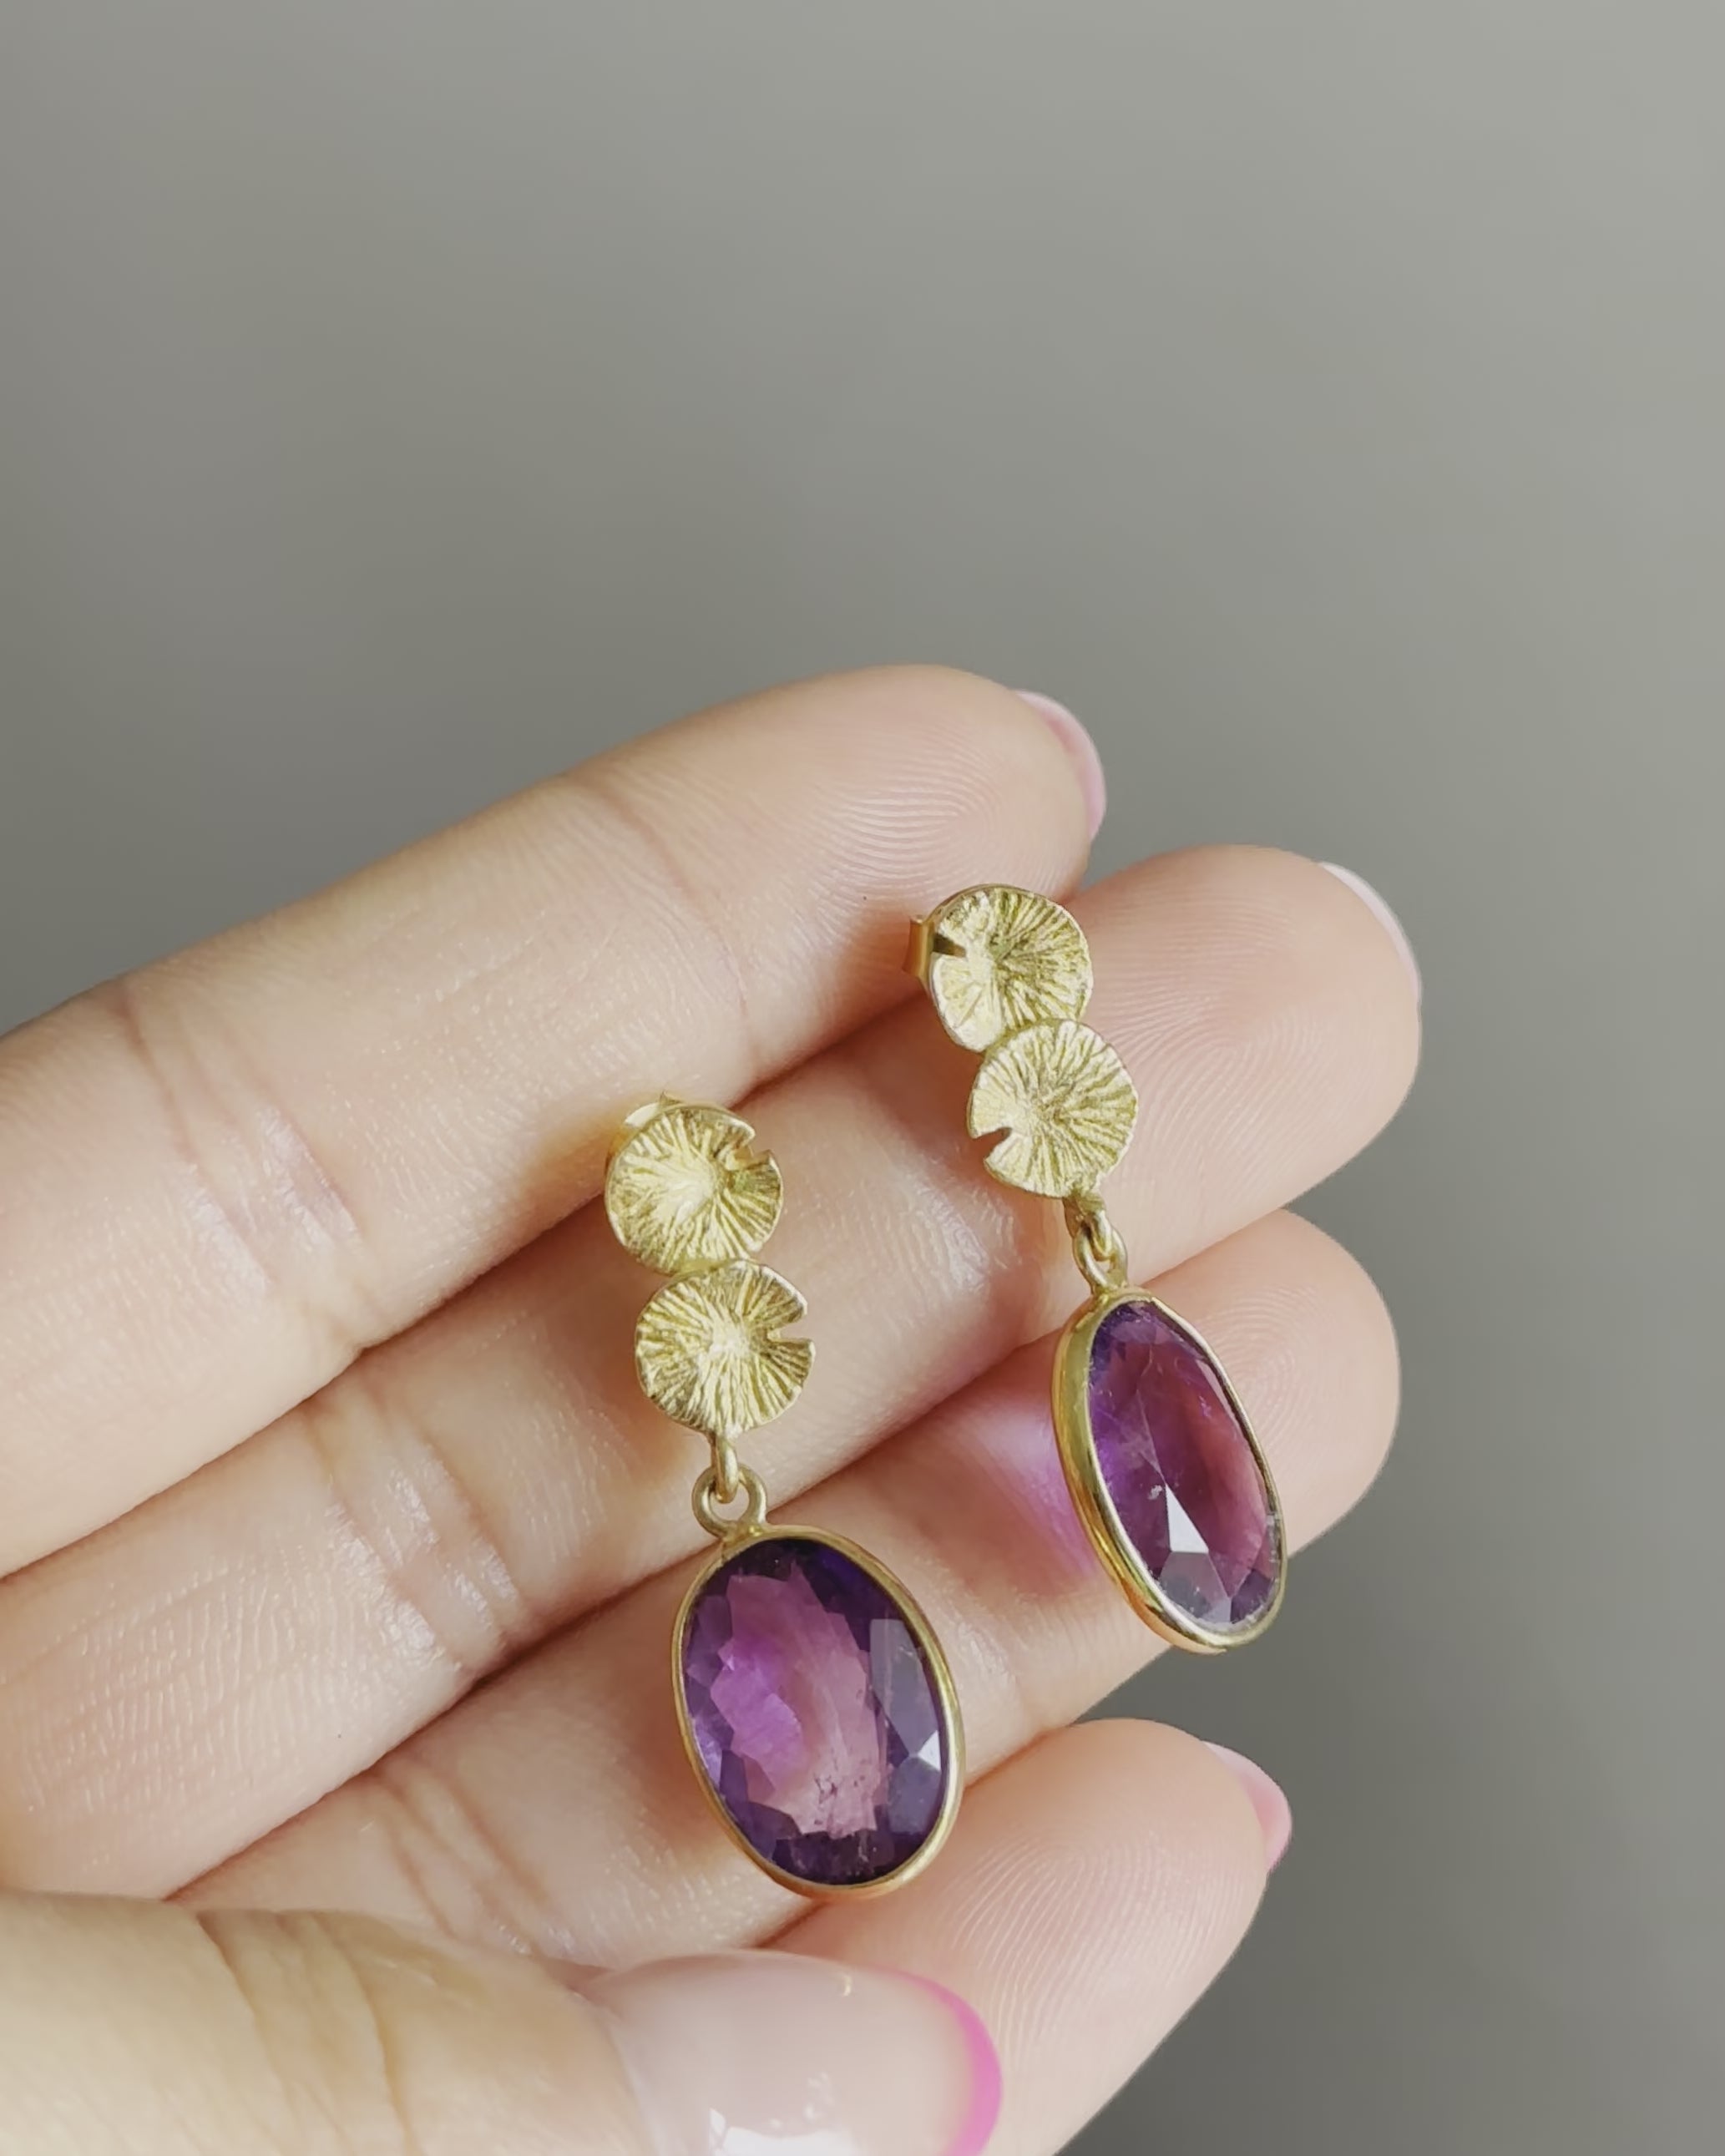 Lily Pad Earrings in Gold Plated Sterling Silver with an Amethyst Gemstone Drop